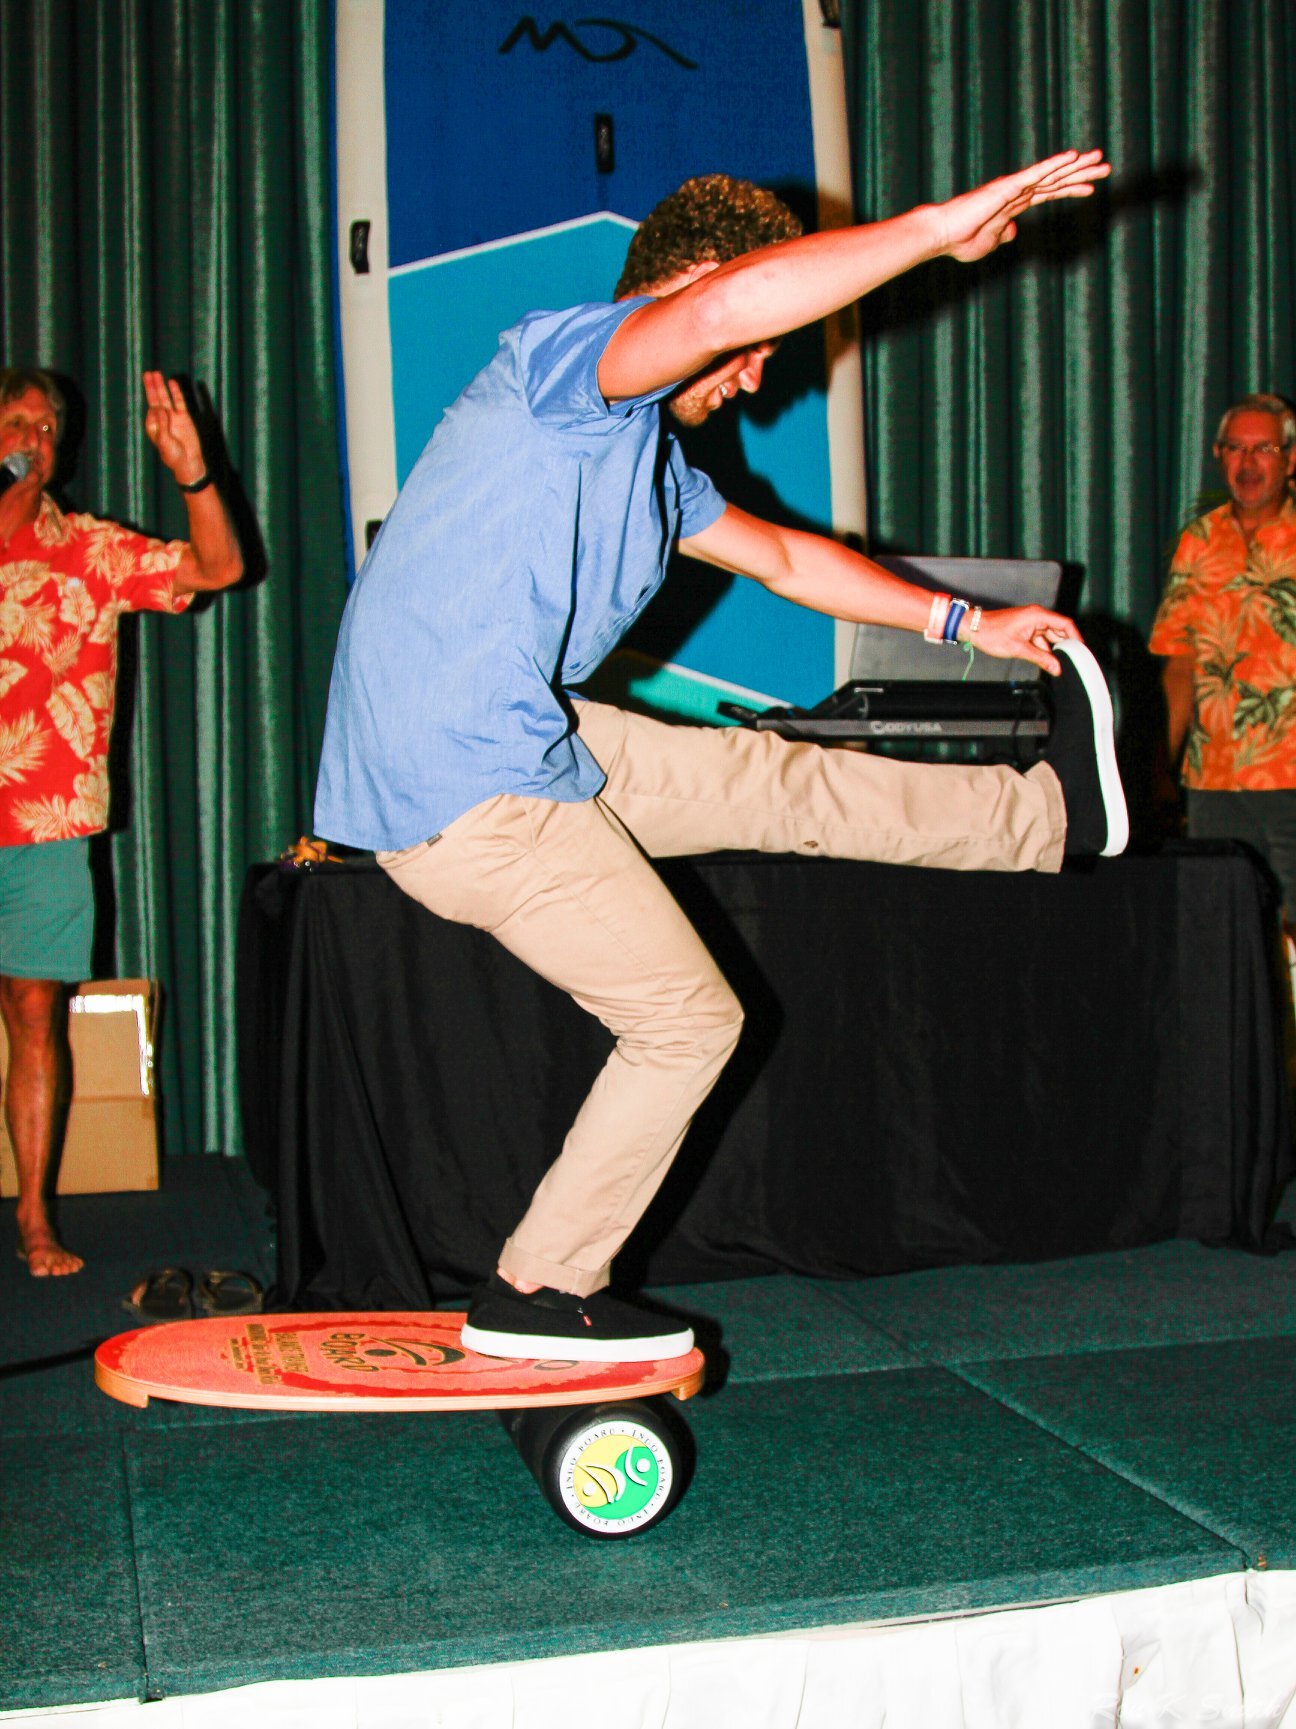 Indoboard at National Kidney Foundation